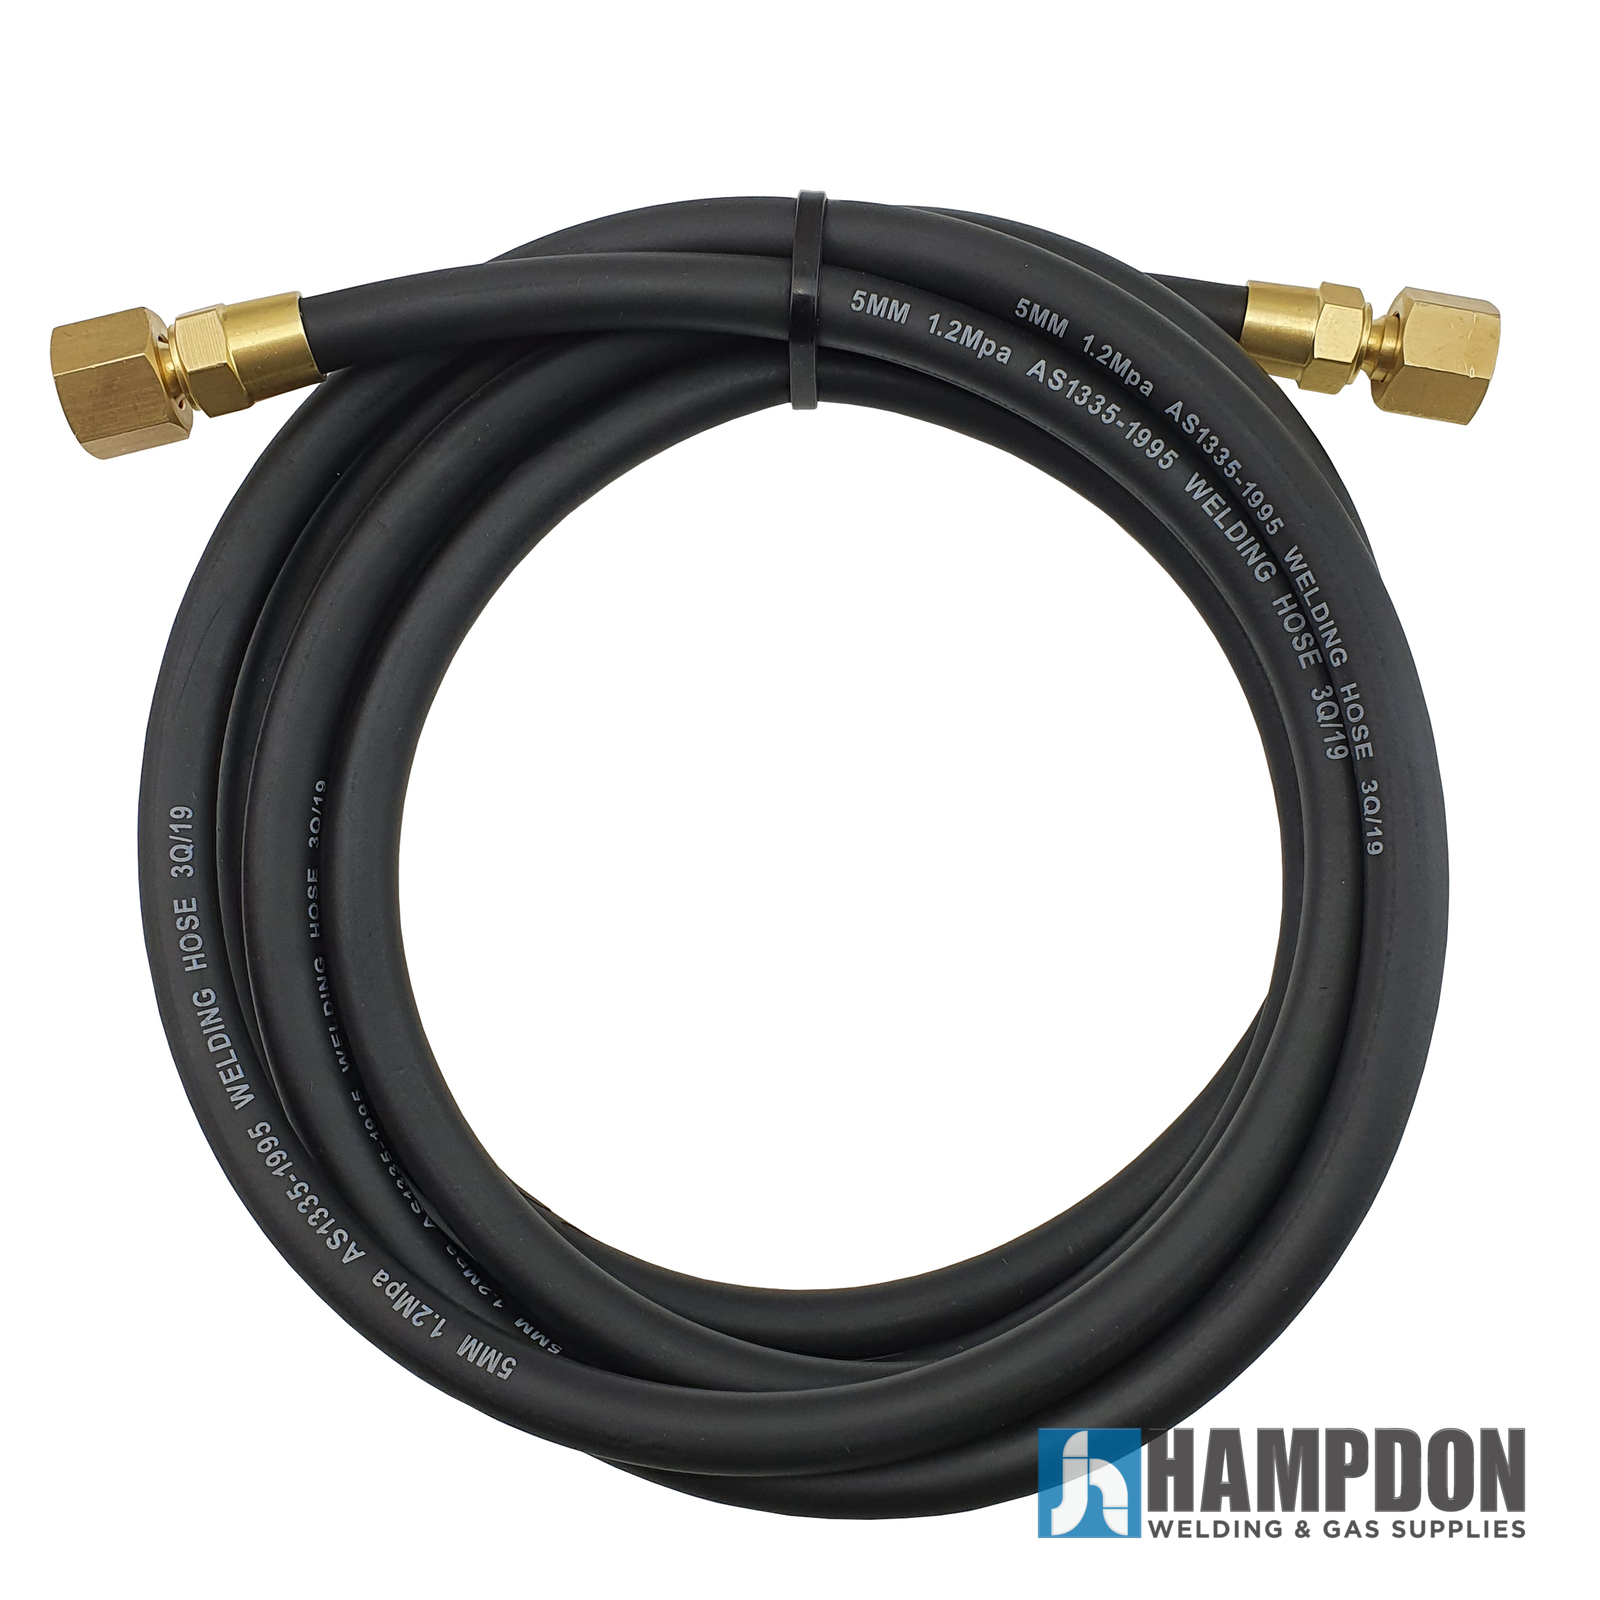 Haofst Argon CO2 Flow Meter Regulator Hose UNF5/8 This Hose Is Standard UNF 5/8 with Inert Gas Fitting 10 inch/0.83ft Mig Tig 